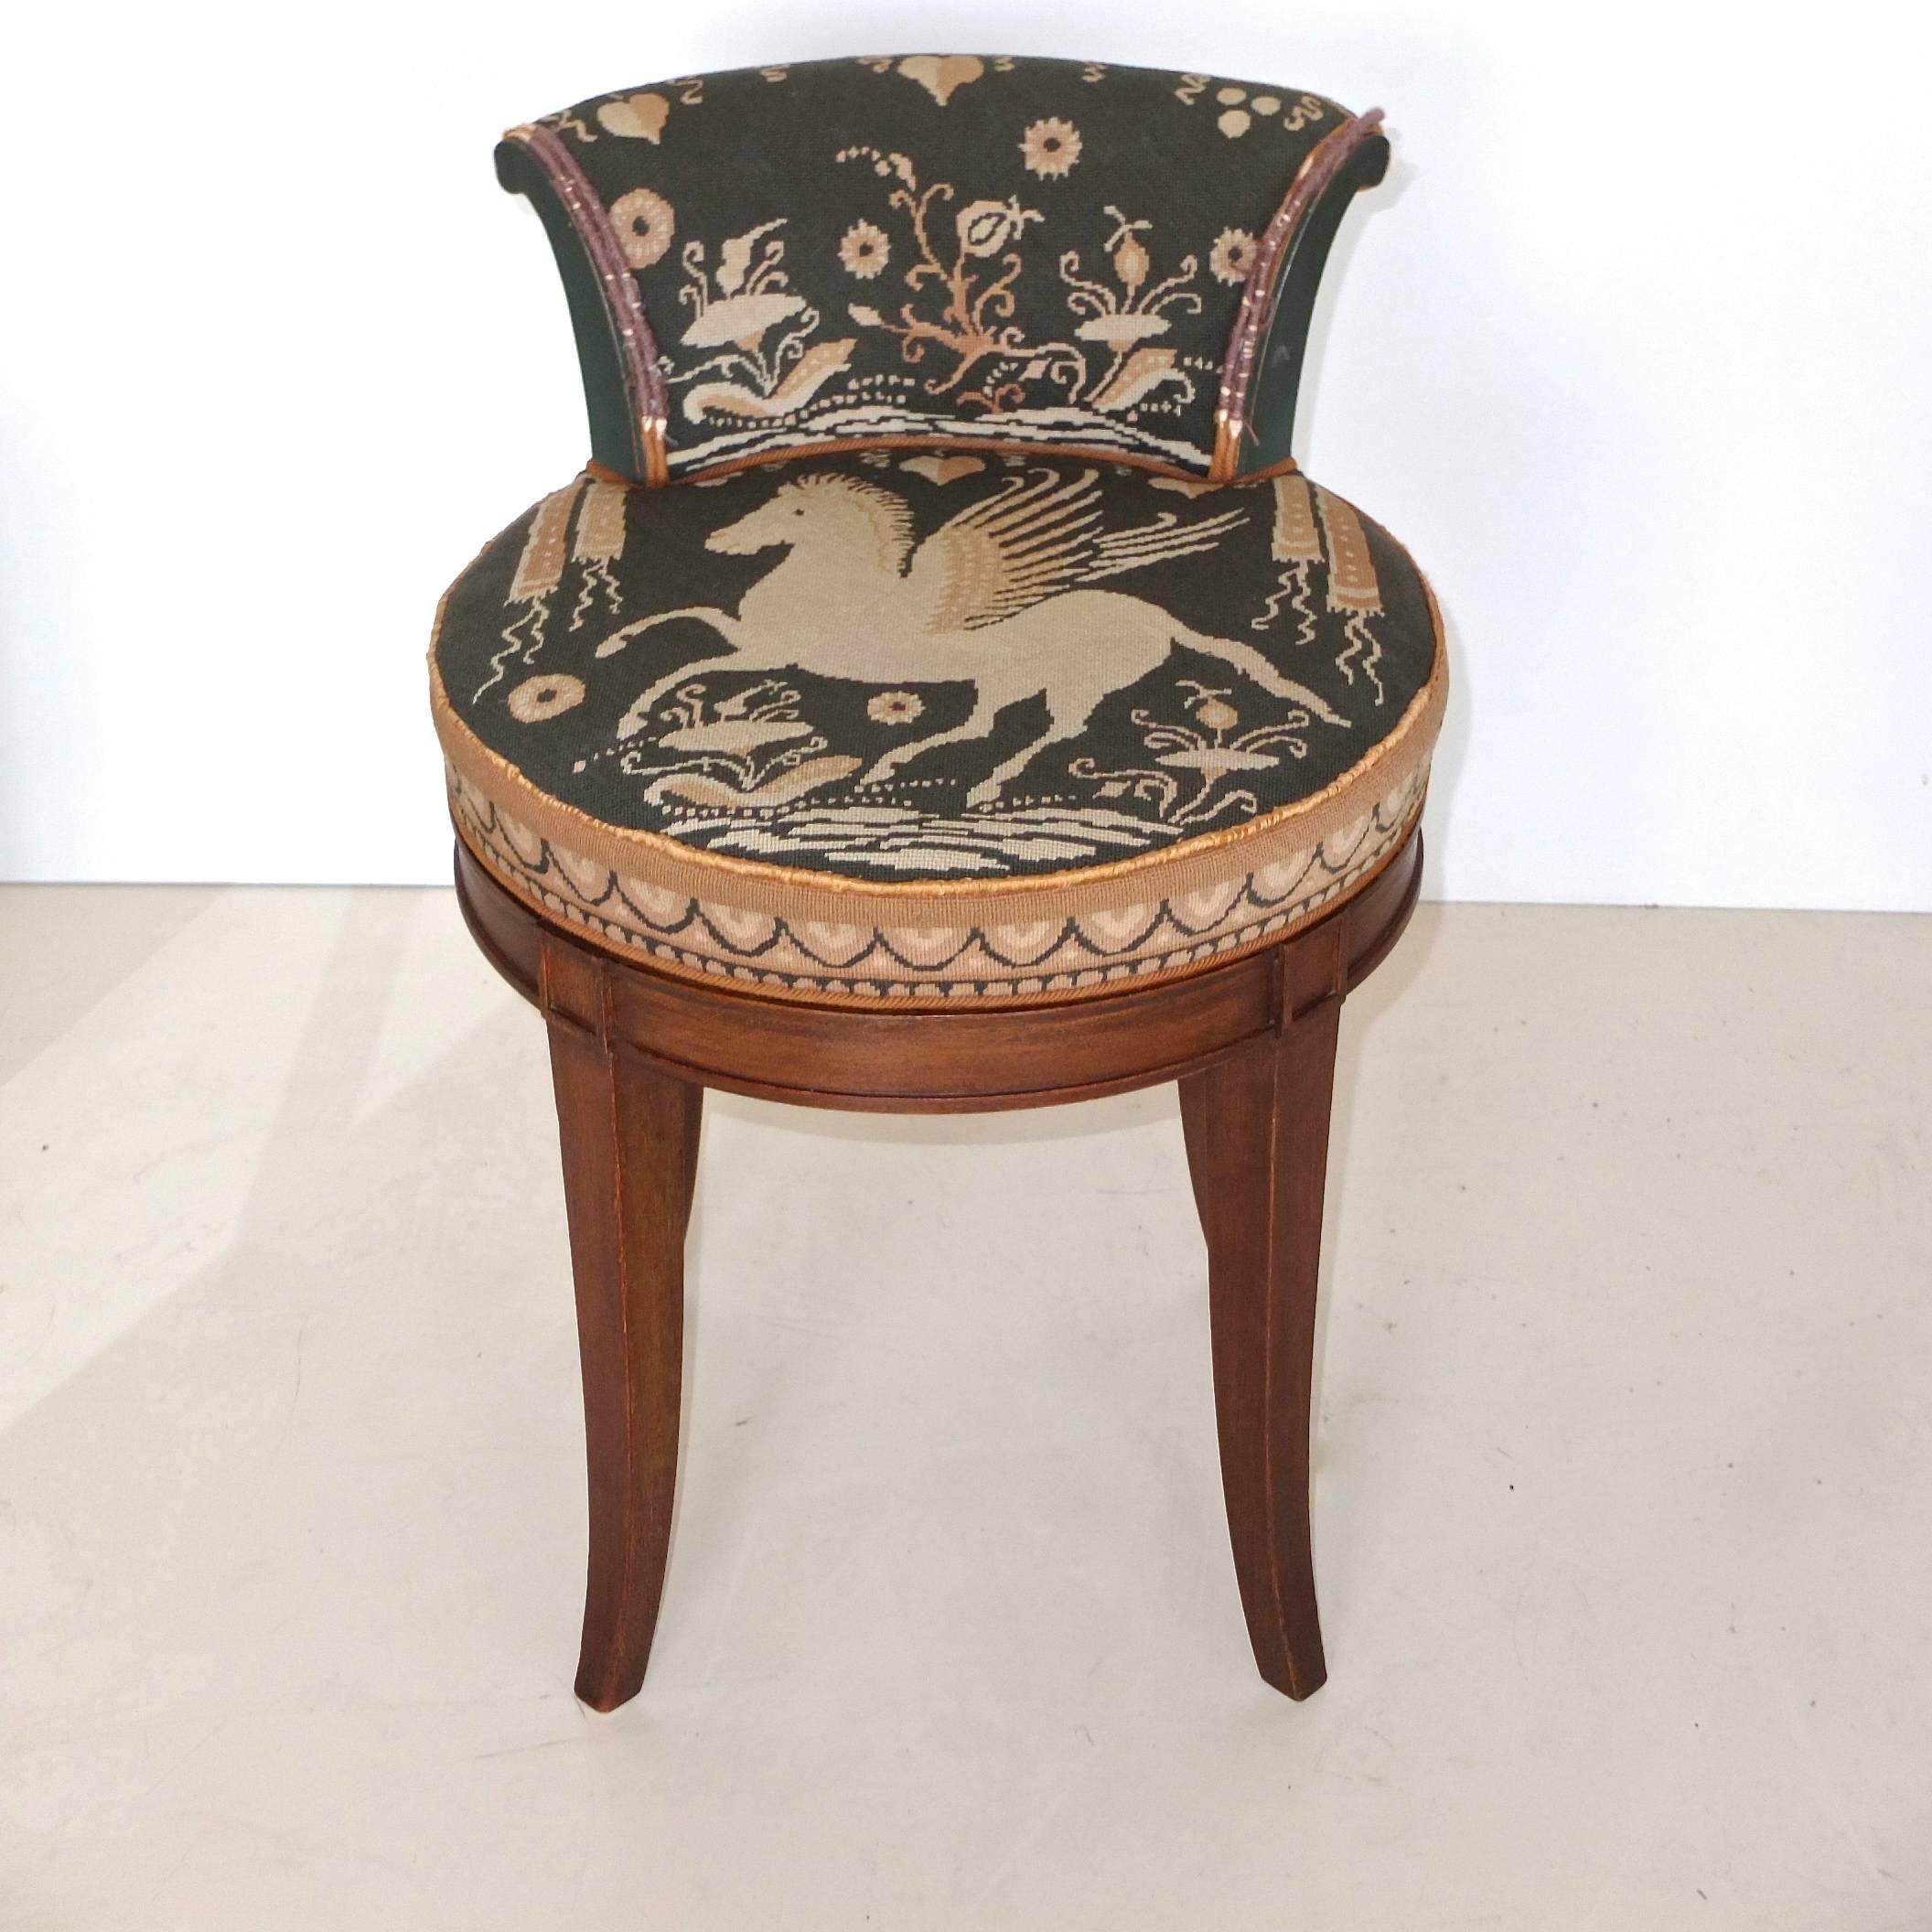 Lovely vintage swivel piano or vanity stool in the style of Edward Wormley for Dunbar and Samuel Marx, in walnut with slightly flared tapered legs and short backrest,

Pillbox cushion and backrest covered in handcrafted needlepoint with stylized